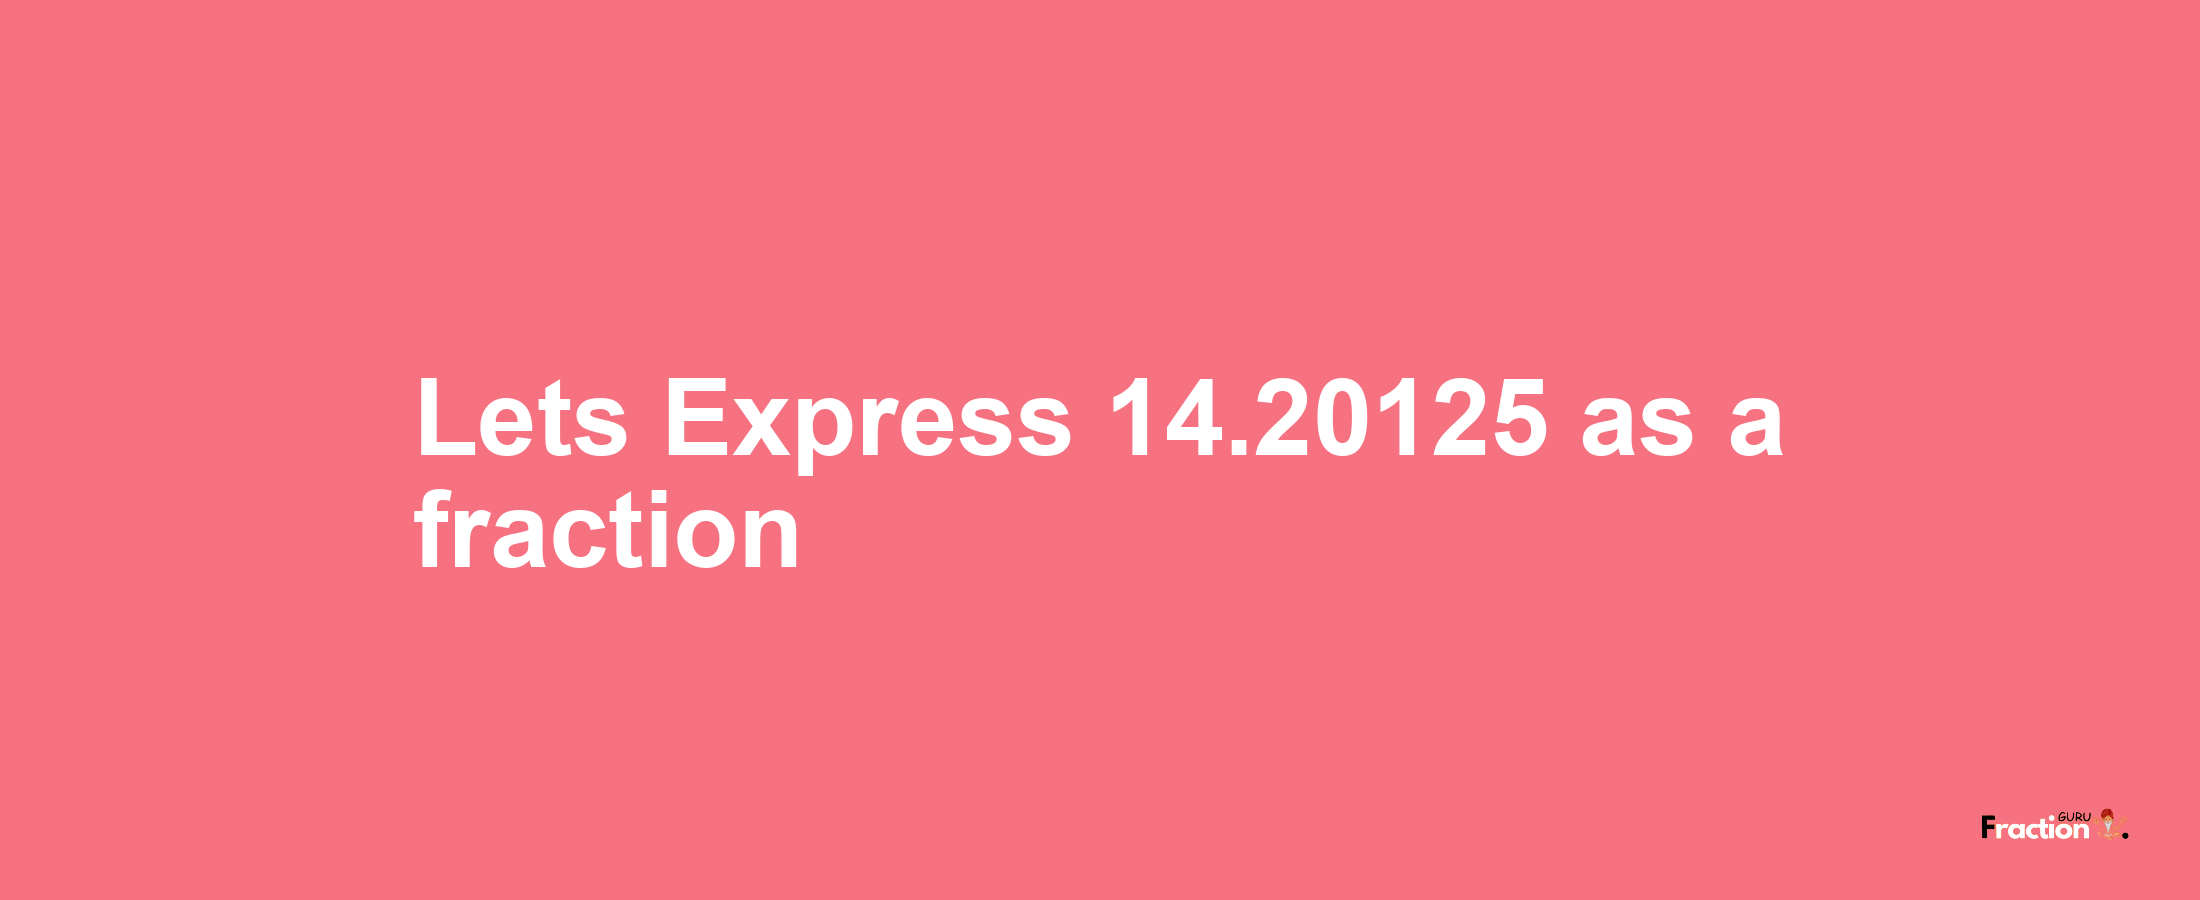 Lets Express 14.20125 as afraction